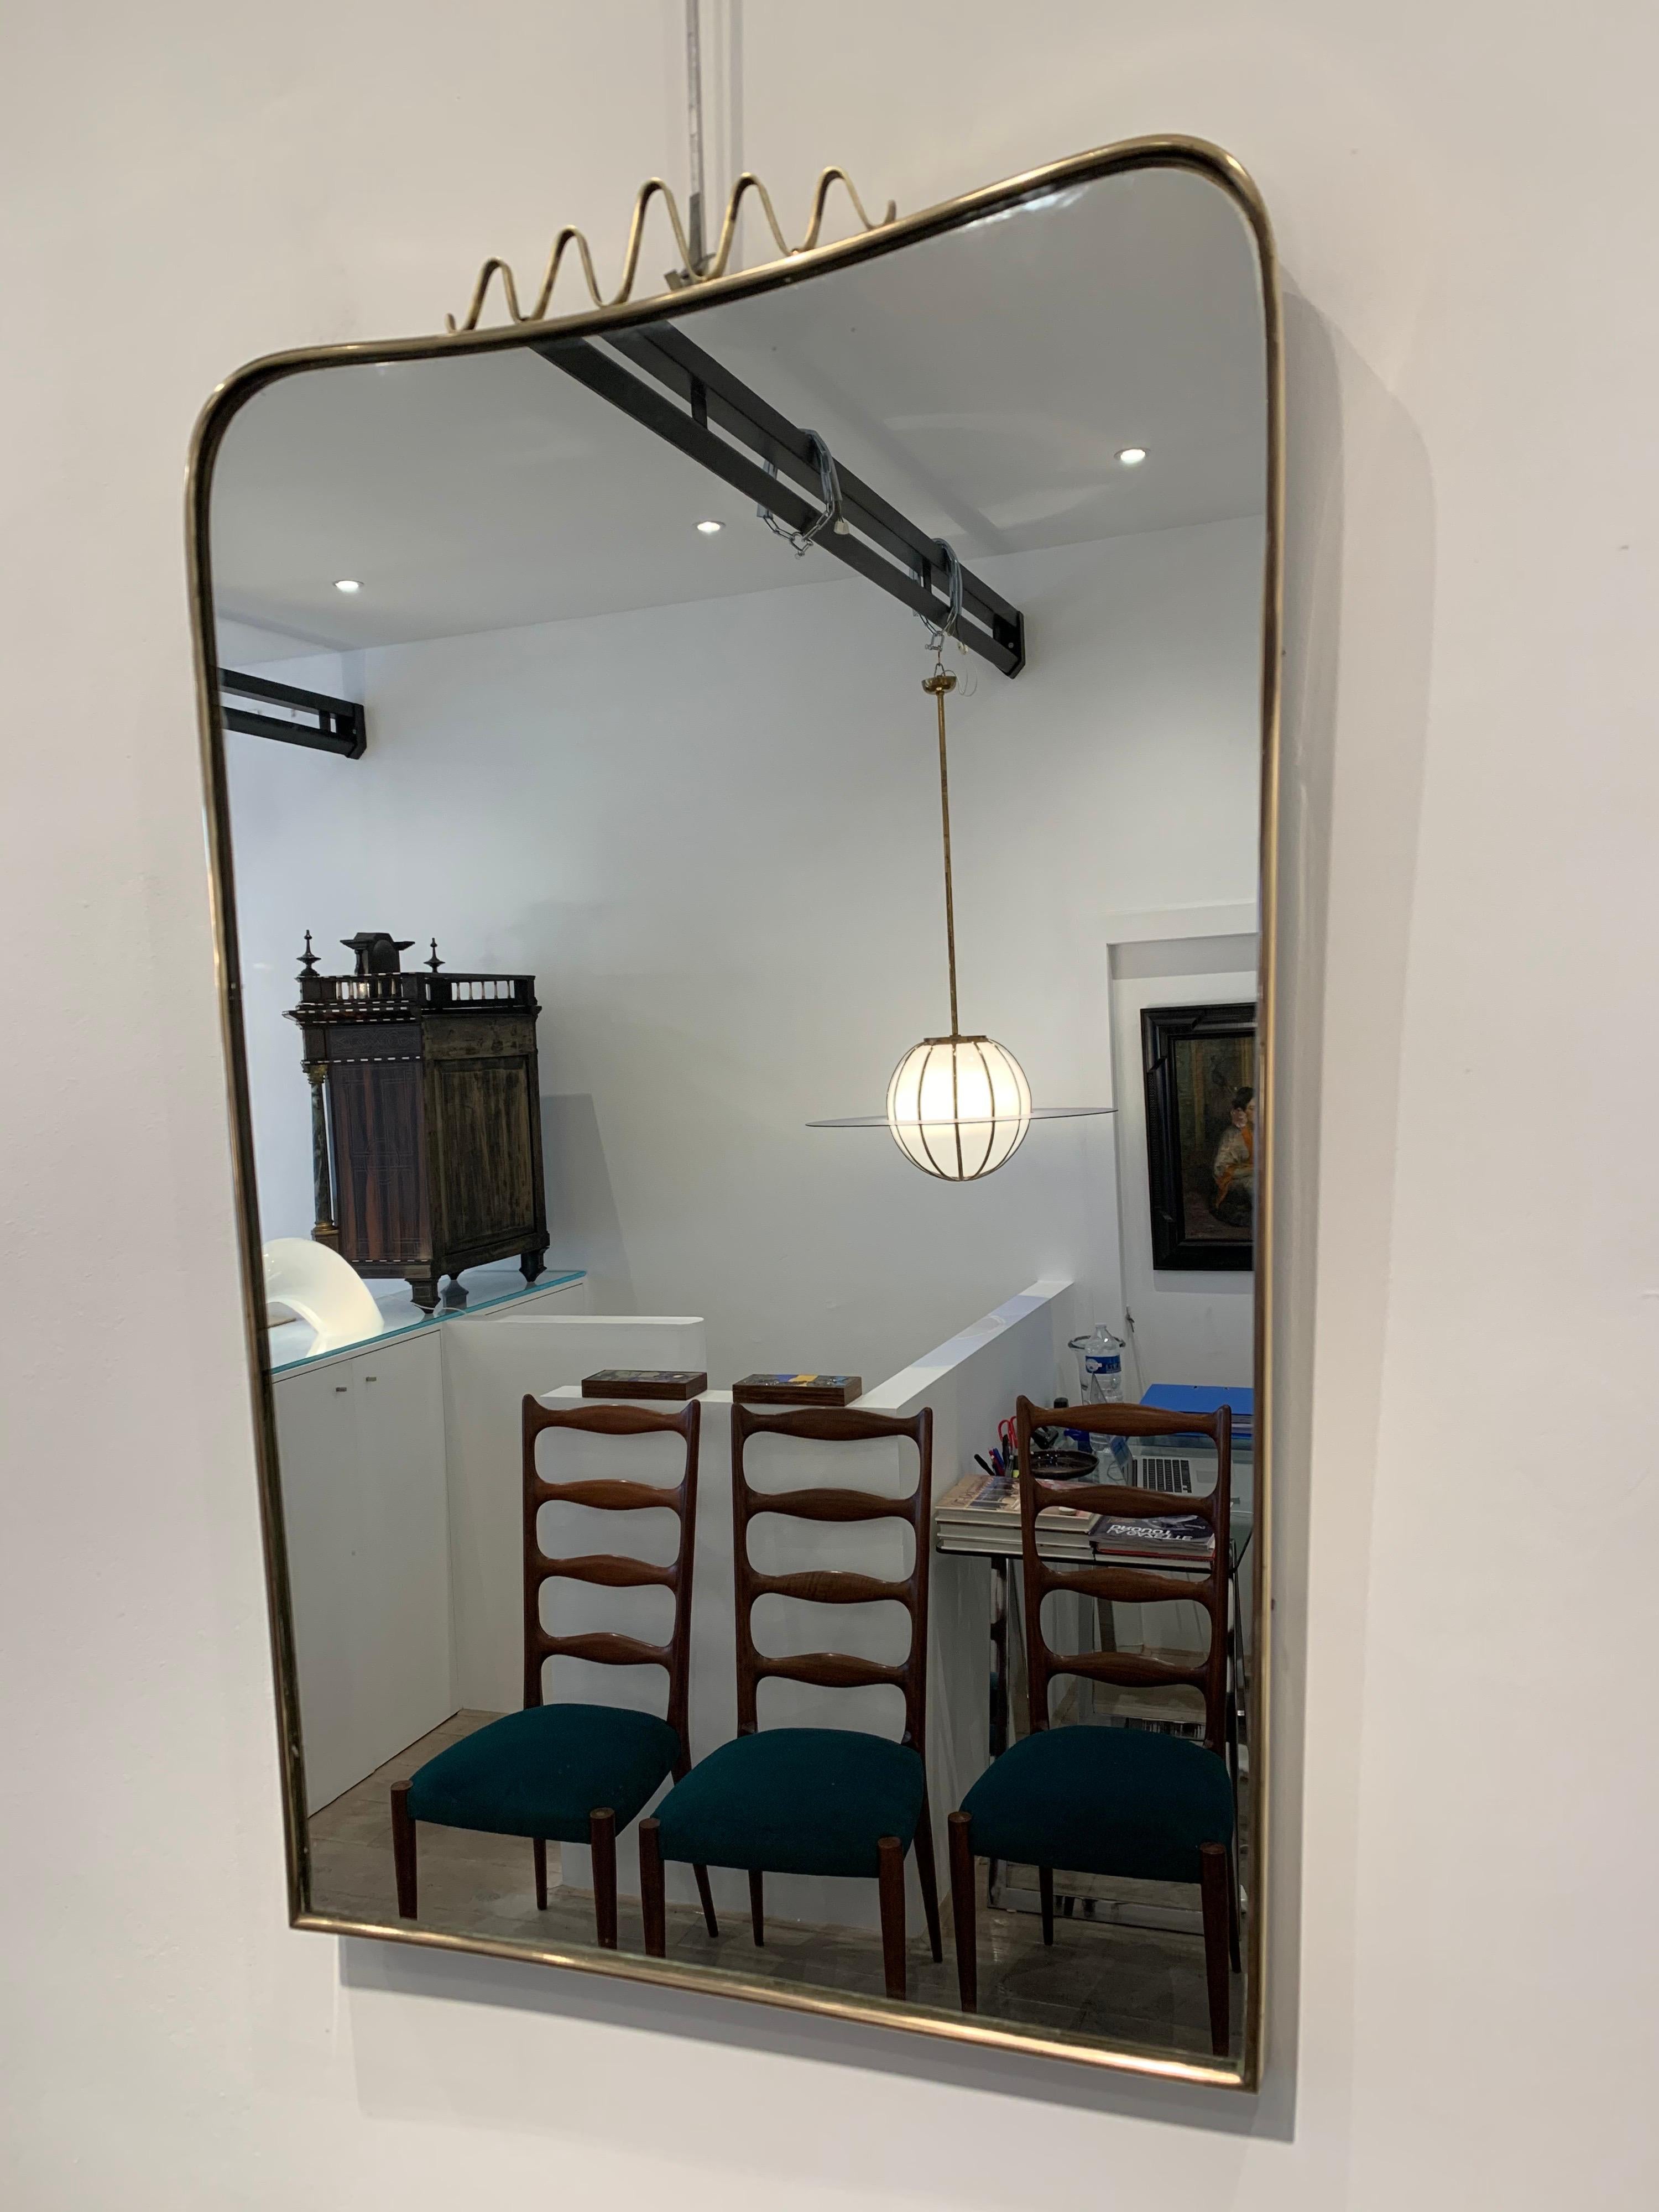 This type of brass mirrors were popular in the 1940s. Gio Ponti designed some of the models. This particular is of the period.